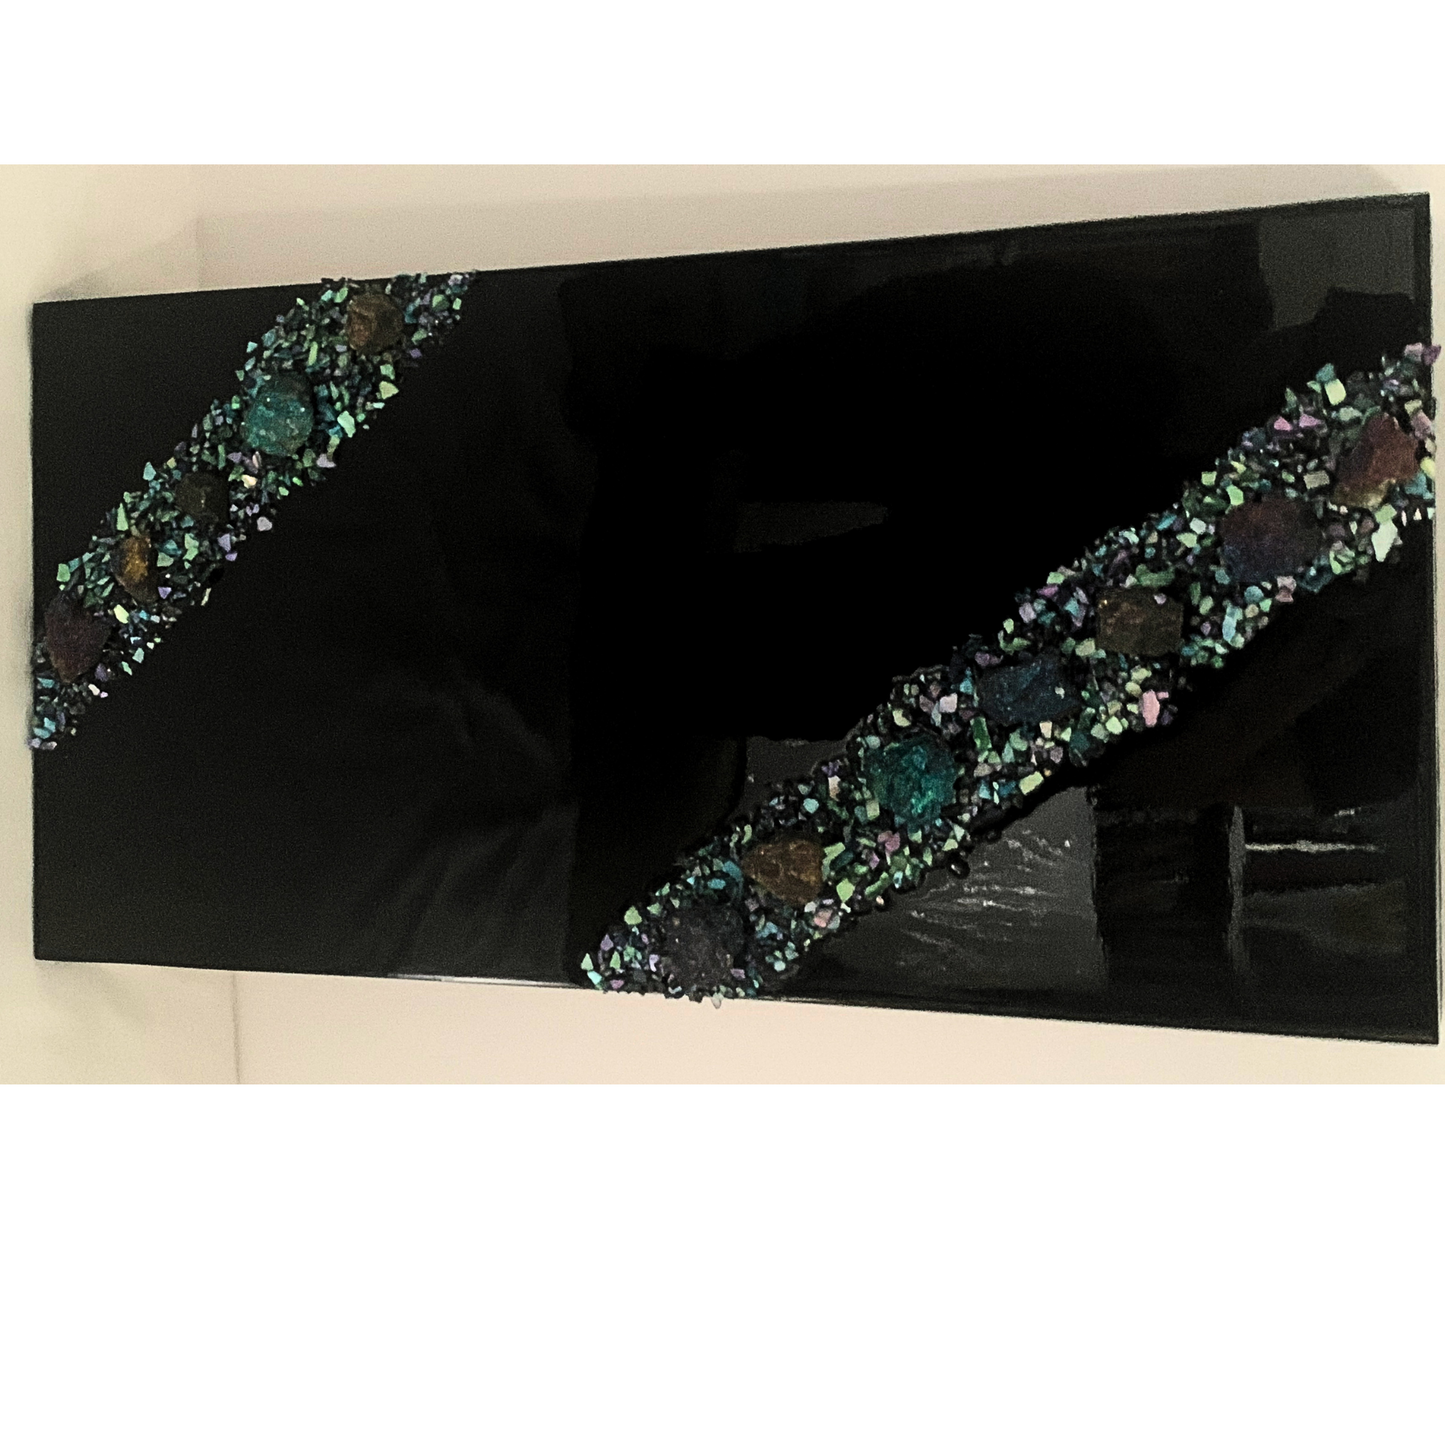 "I AM HEALING" Black Resin Art Piece with Chalcopyrite Crystals & Abalone Shells